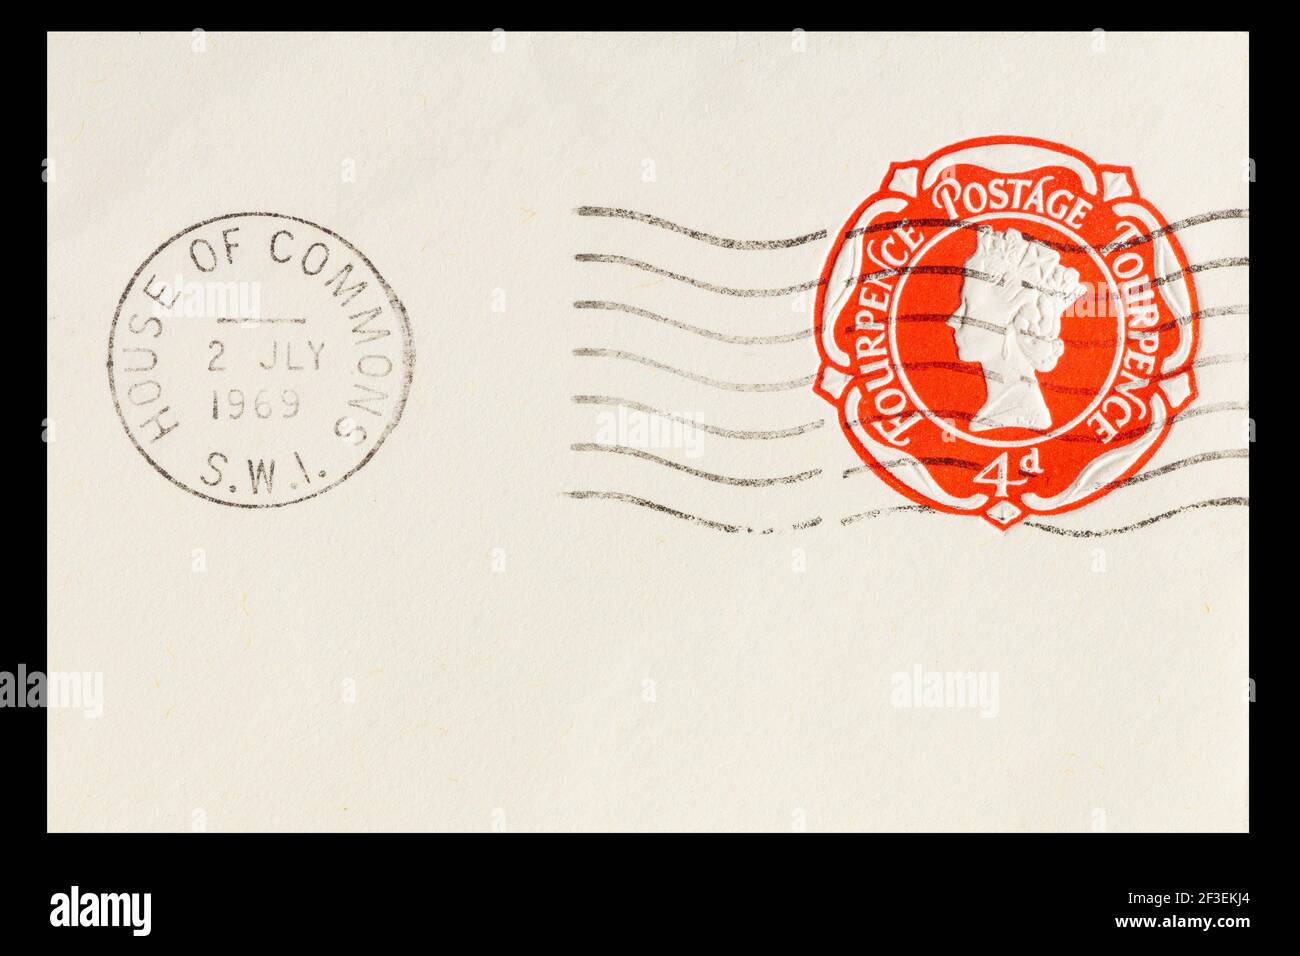 Vintage cancelled prepaid 4d postage stamp from Great Britain. Dated 2nd July 1969 and posted in the House of Commons. Clear red print in fine detail Stock Photo